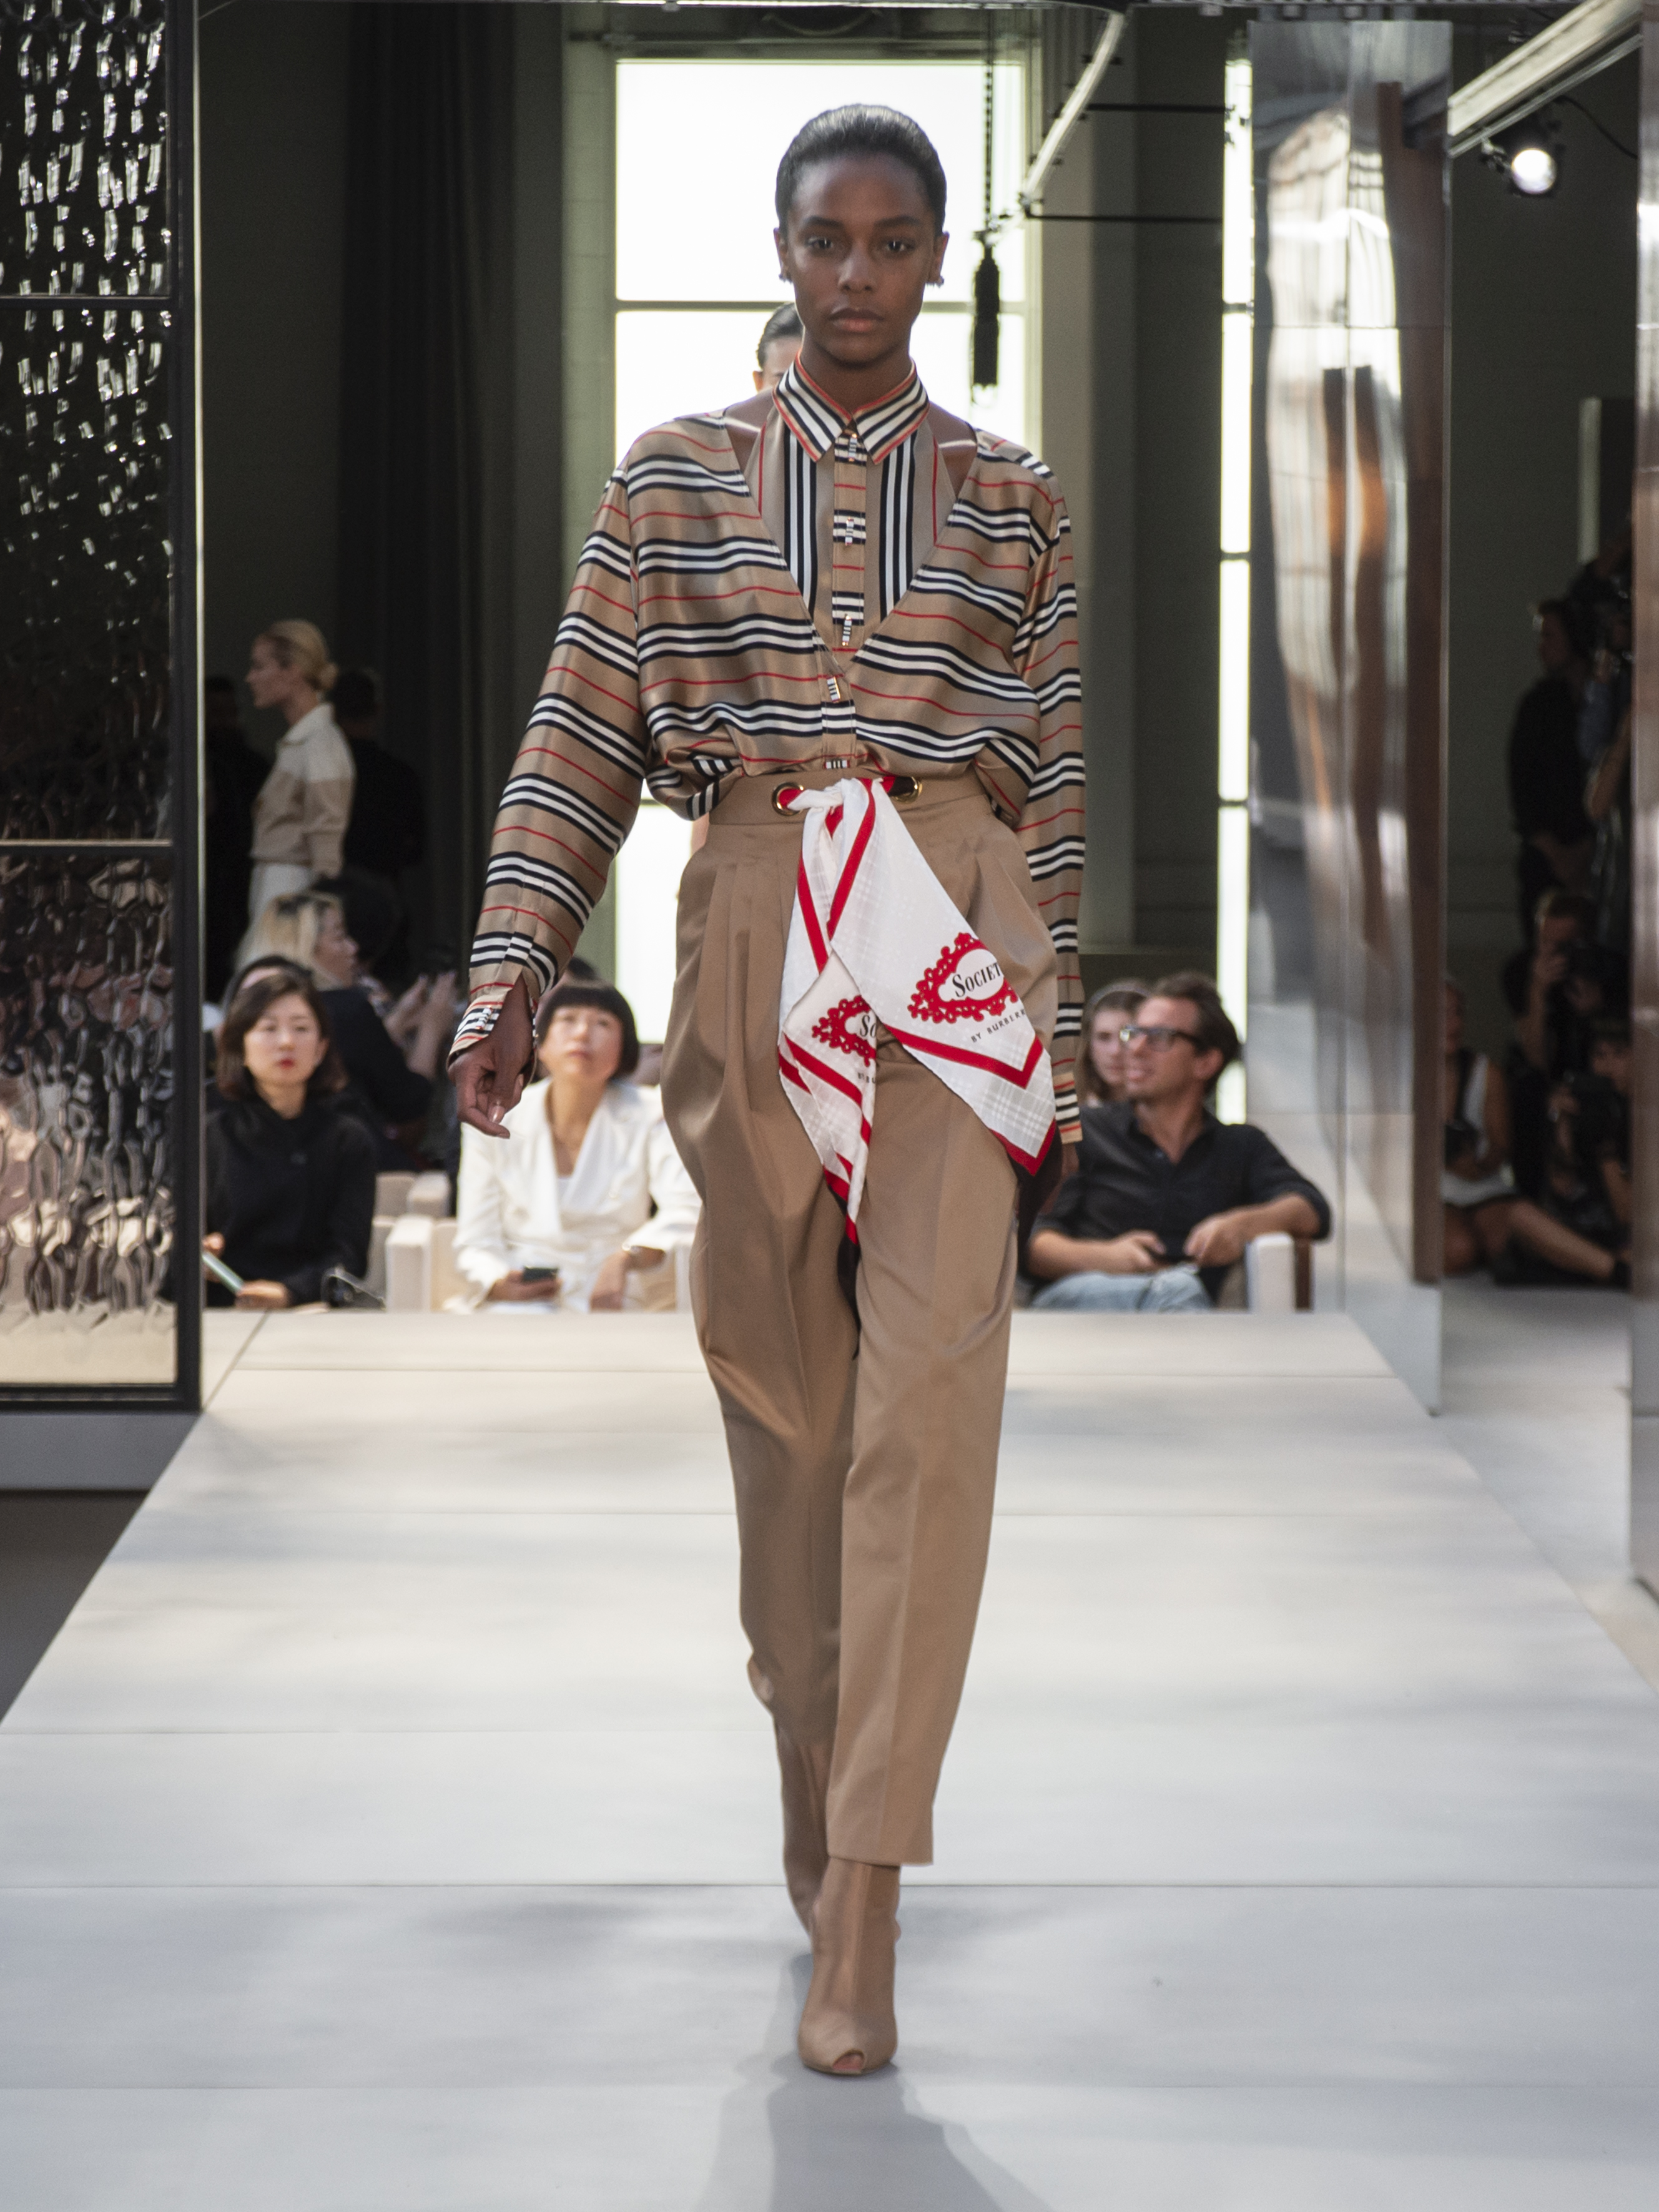 Riccardo Tisci reintroduced the check in pinstripes on a variation of looks in the SS19 collection